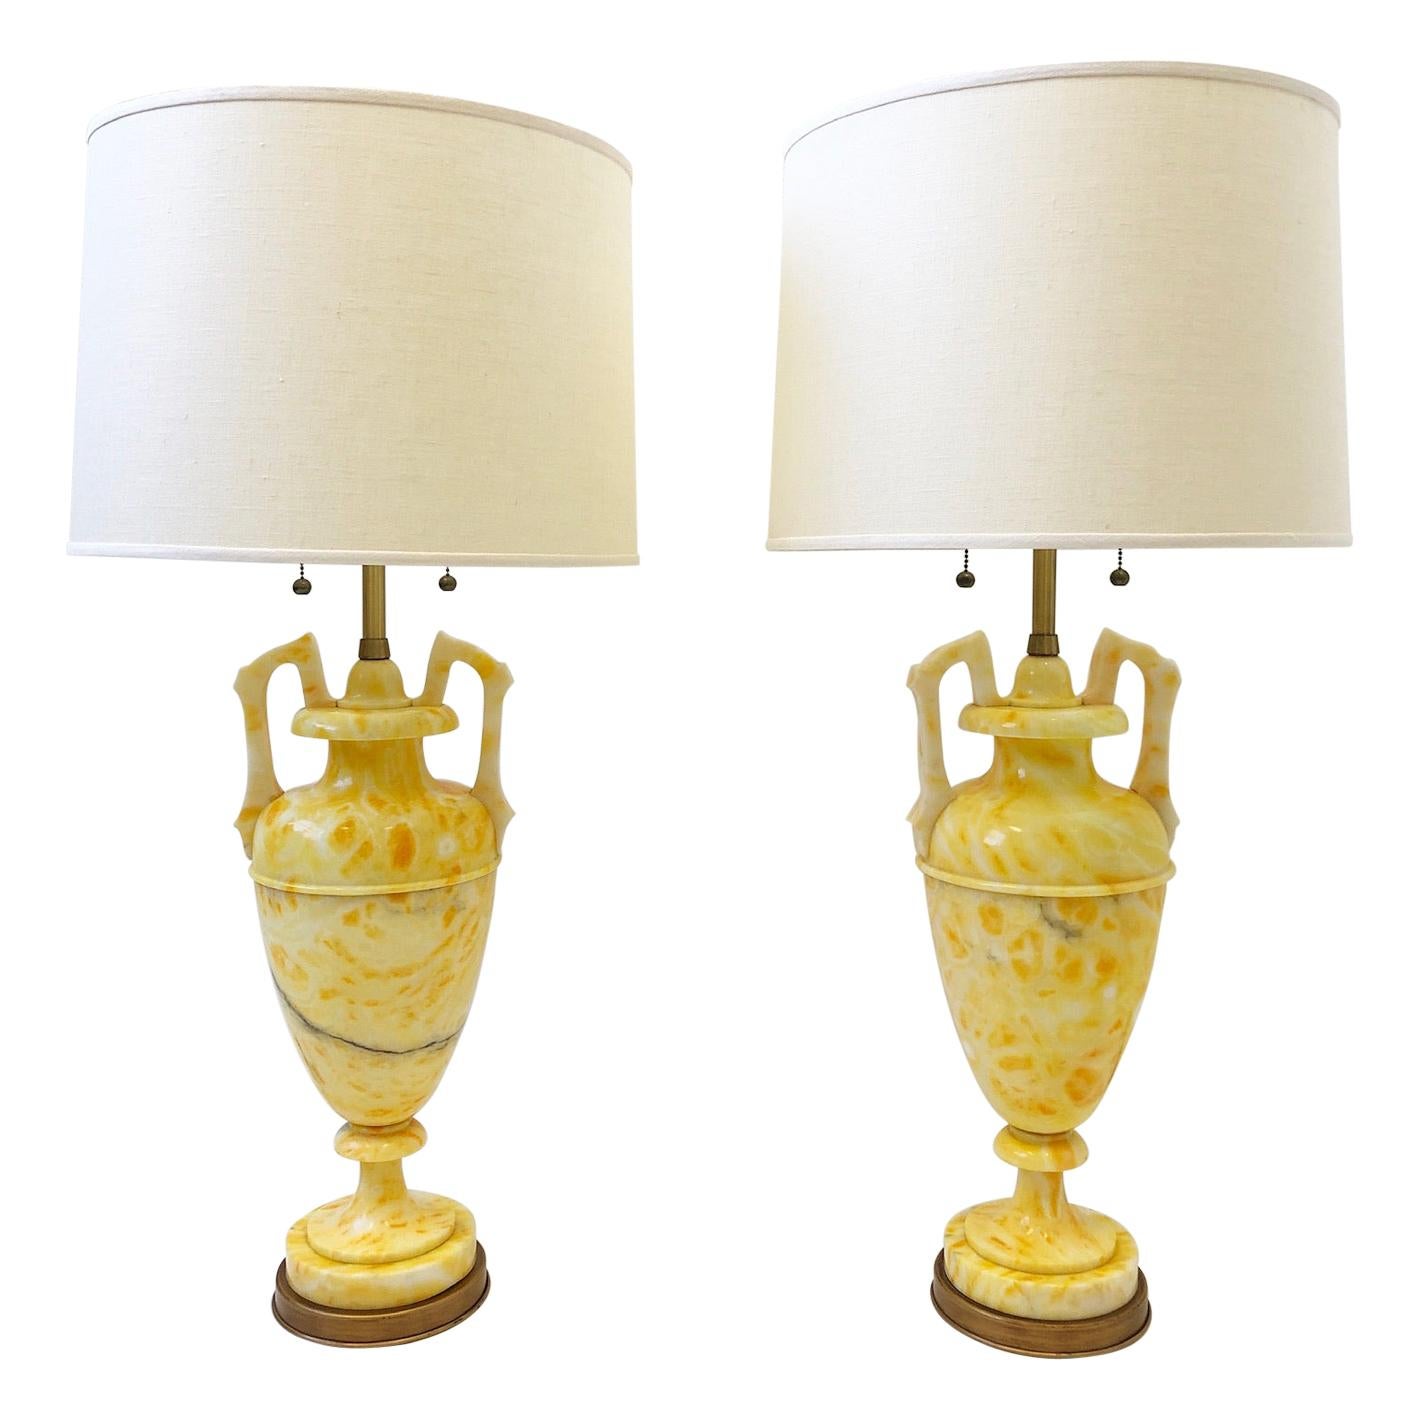 Pair of Italian Yellow Marble and Brass Table Lamps by Marbro Lamp Co.